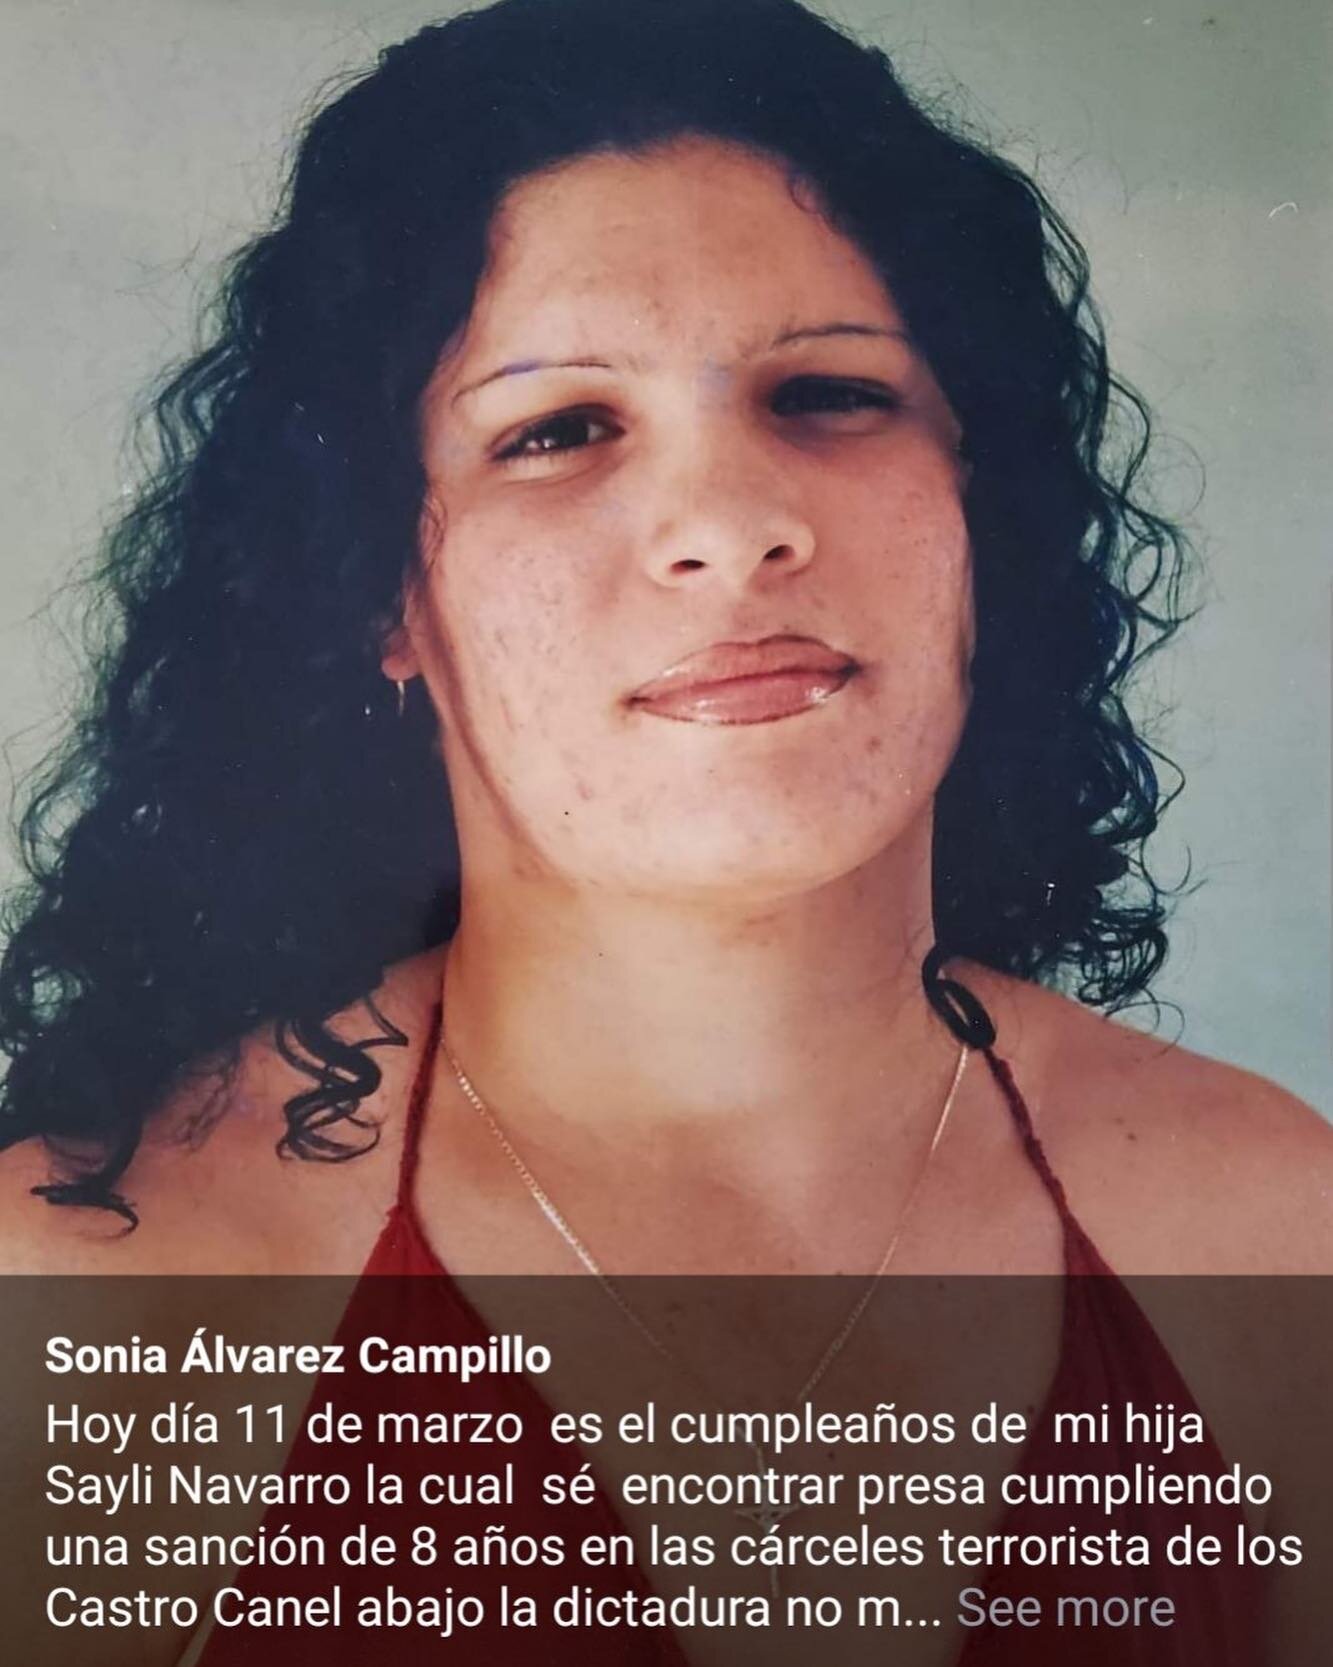 Today is the birthday of Sayl&iacute; Navarro, a leader in the struggle for freedom in #Cuba. Imprisoned for exercising fundamental #humanrights.  At least 125 women are imprisoned/prosecuted in Cuba in retaliation for their ideas and activism in sup